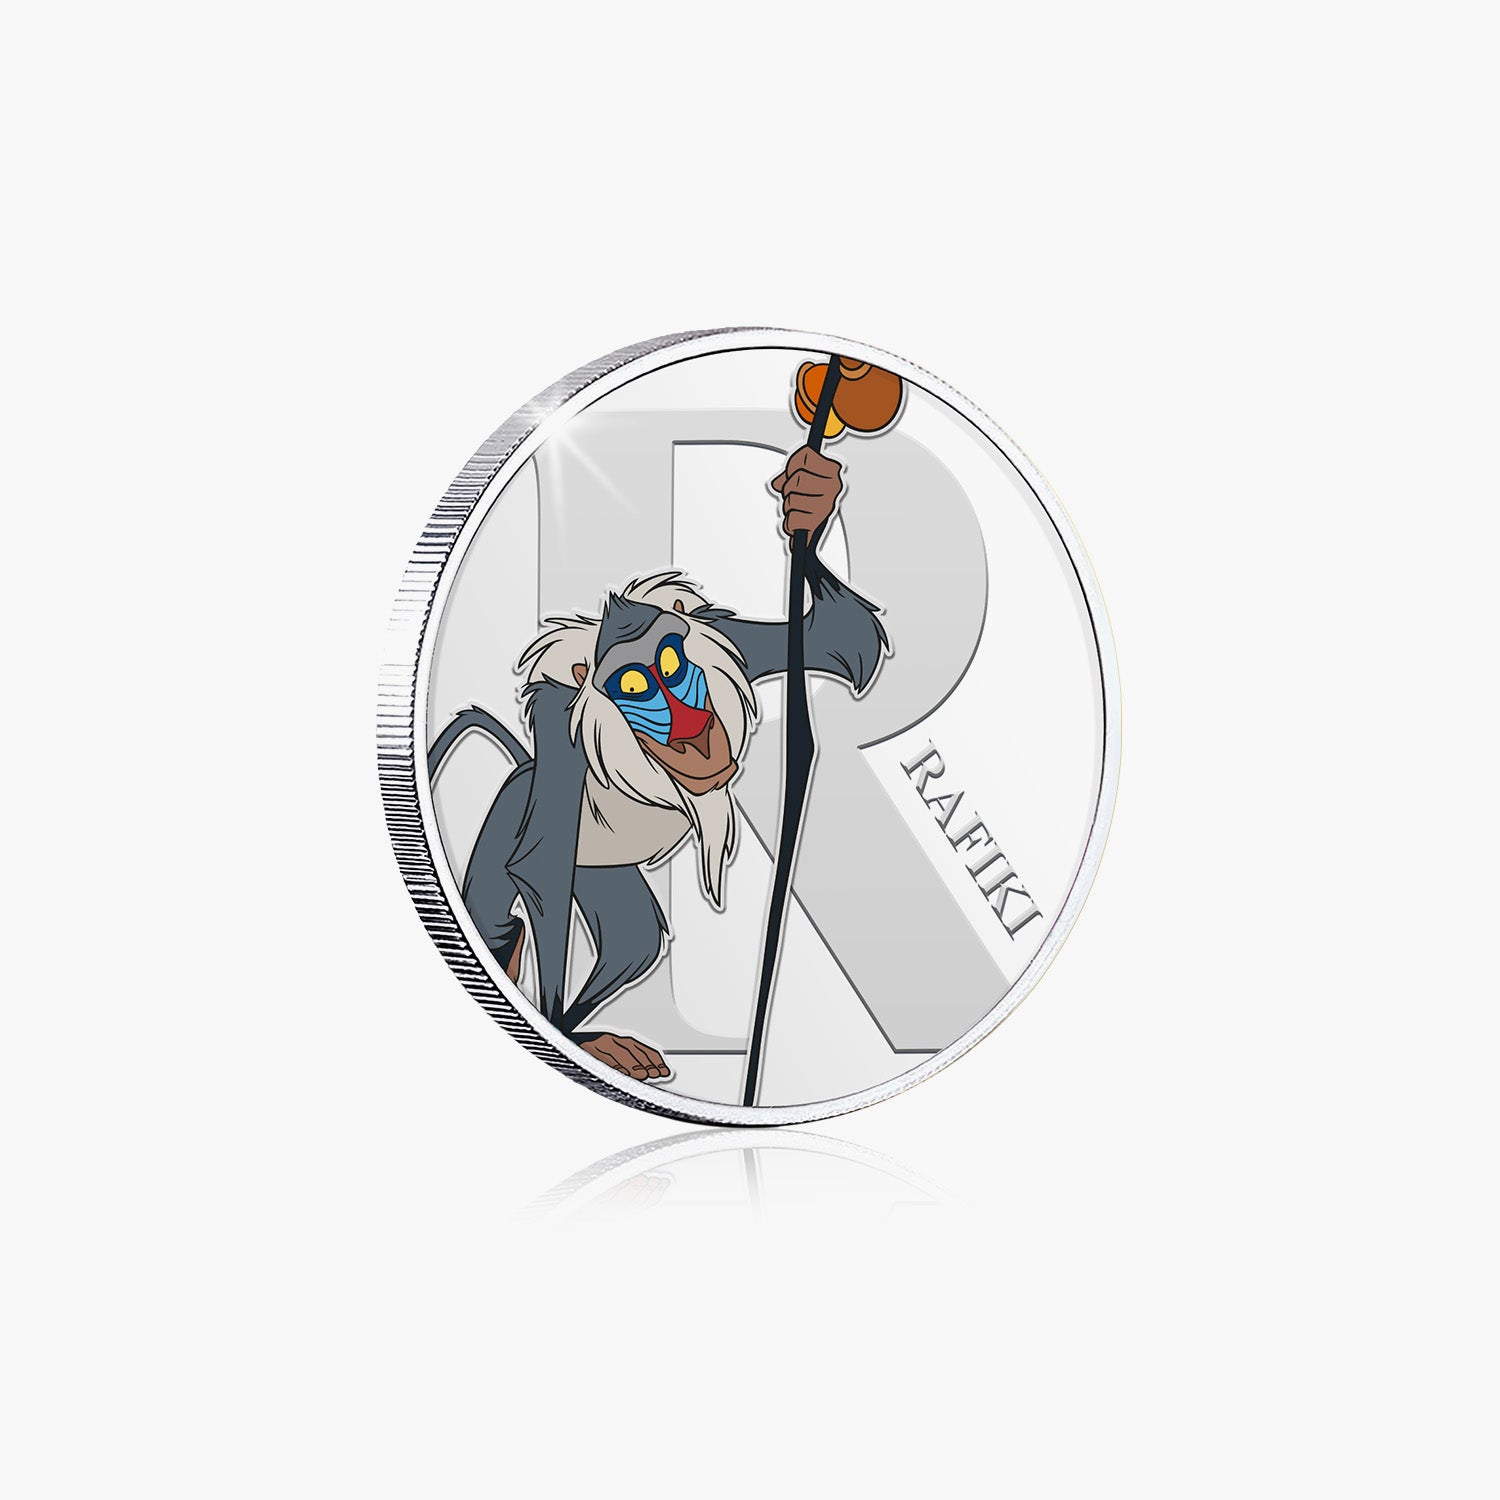 R is for Rafiki Silver-Plated Full Colour Commemorative